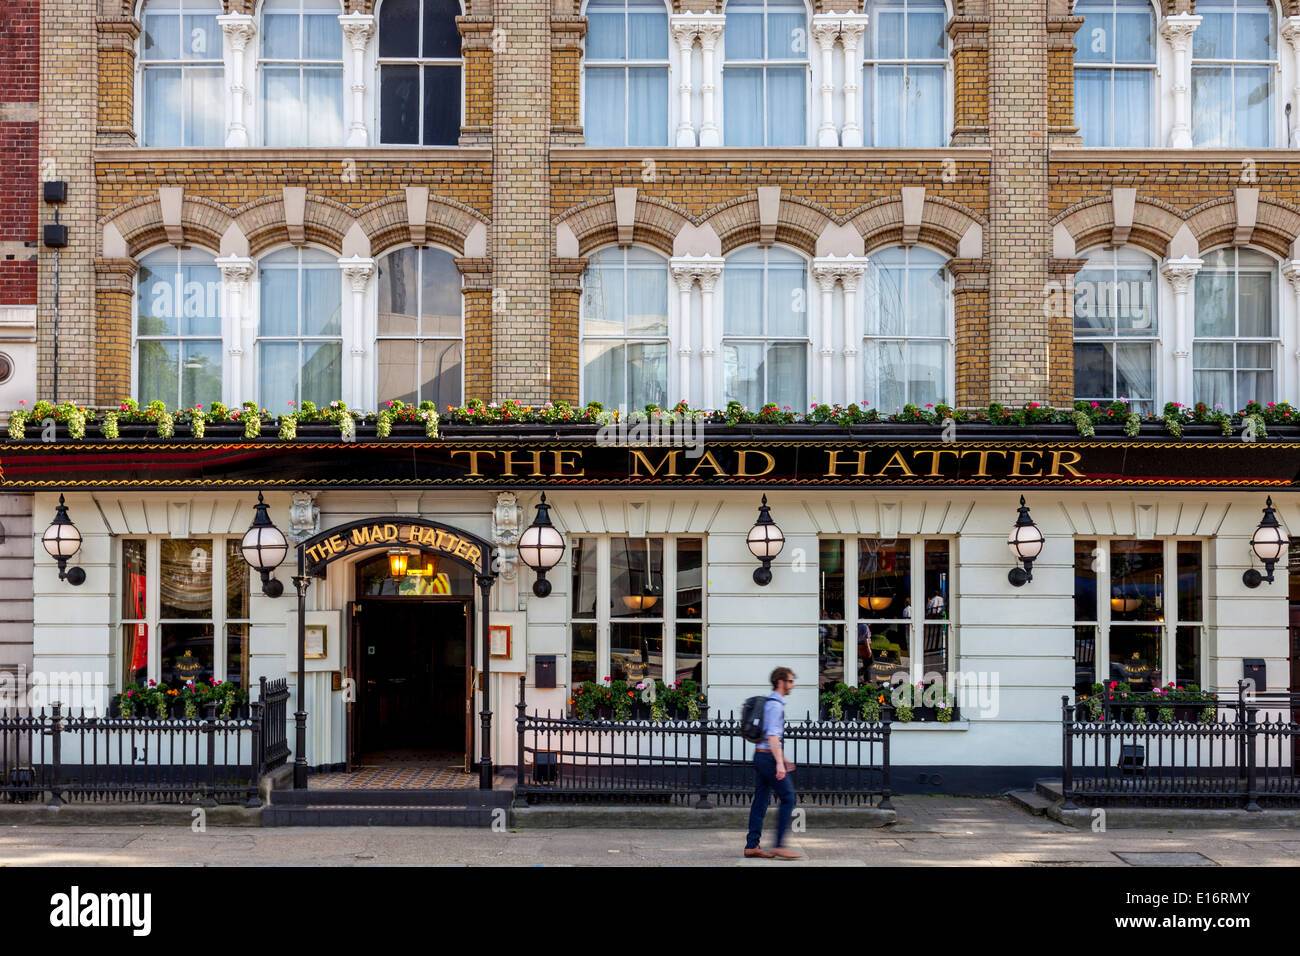 The Mad Hatter Hotel, Stamford Street, London, England Stock Photo